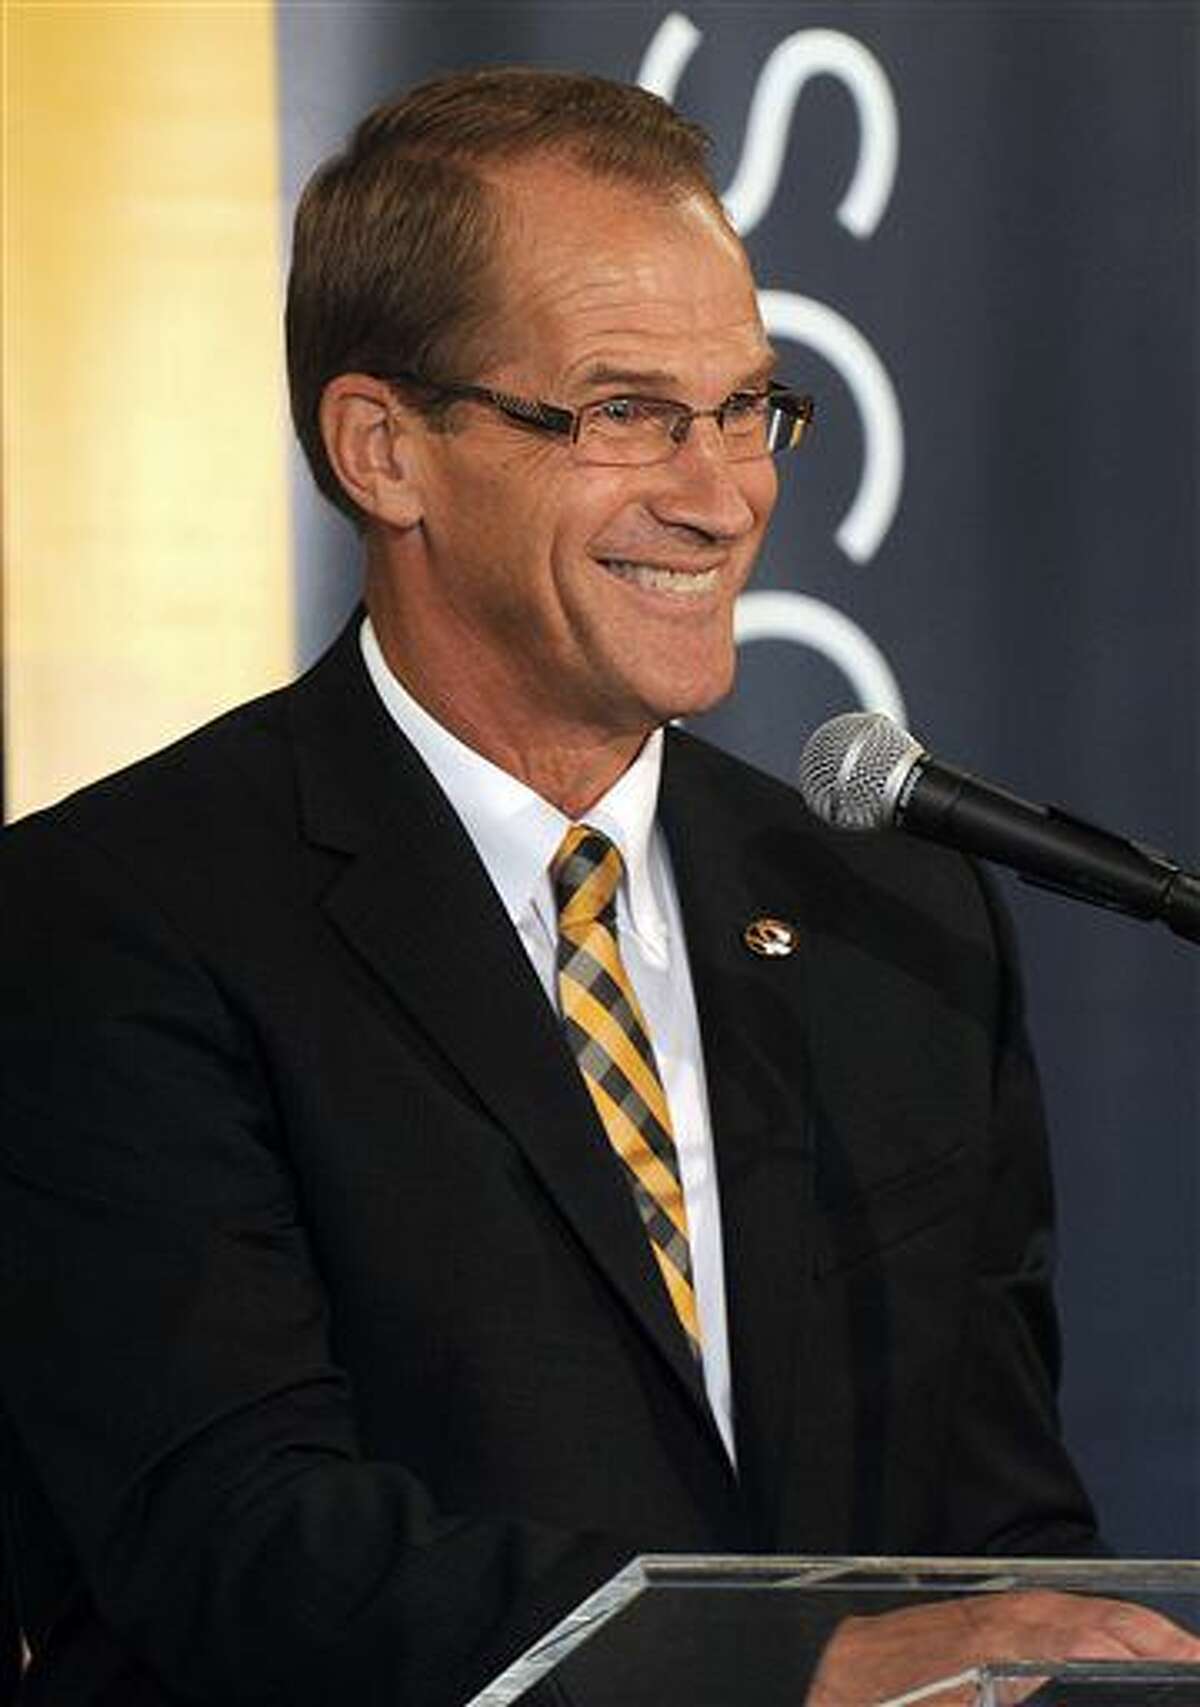 Newly-appointed University of Missouri athletic director Jim Sterk talks about accepting the position during a press conference, Thursday Aug. 11, 2016, at the Columns Club in Memorial Stadium in Columbia, Mo. (Don Shrubshell/Columbia Daily Tribune via AP)